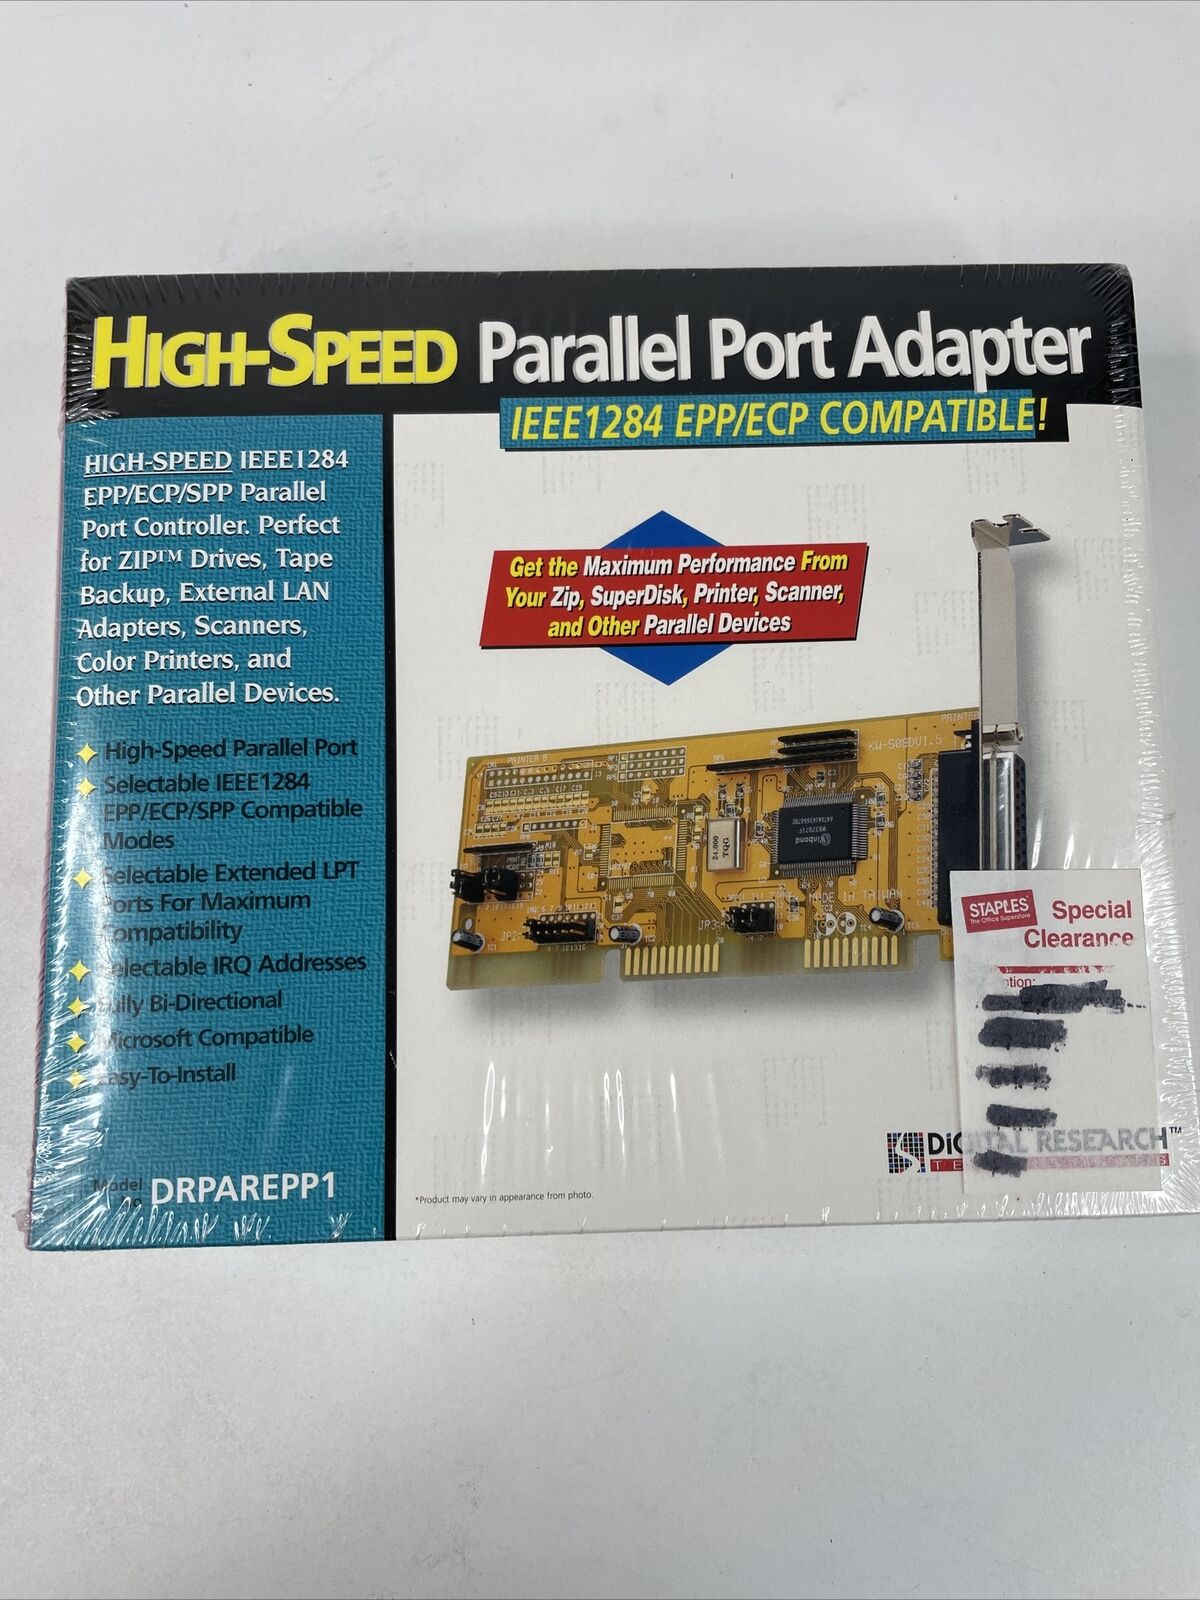 High-Speed Parallel Port Adapter Digital Research, IEEE1284 EPP/ECP, Sealed